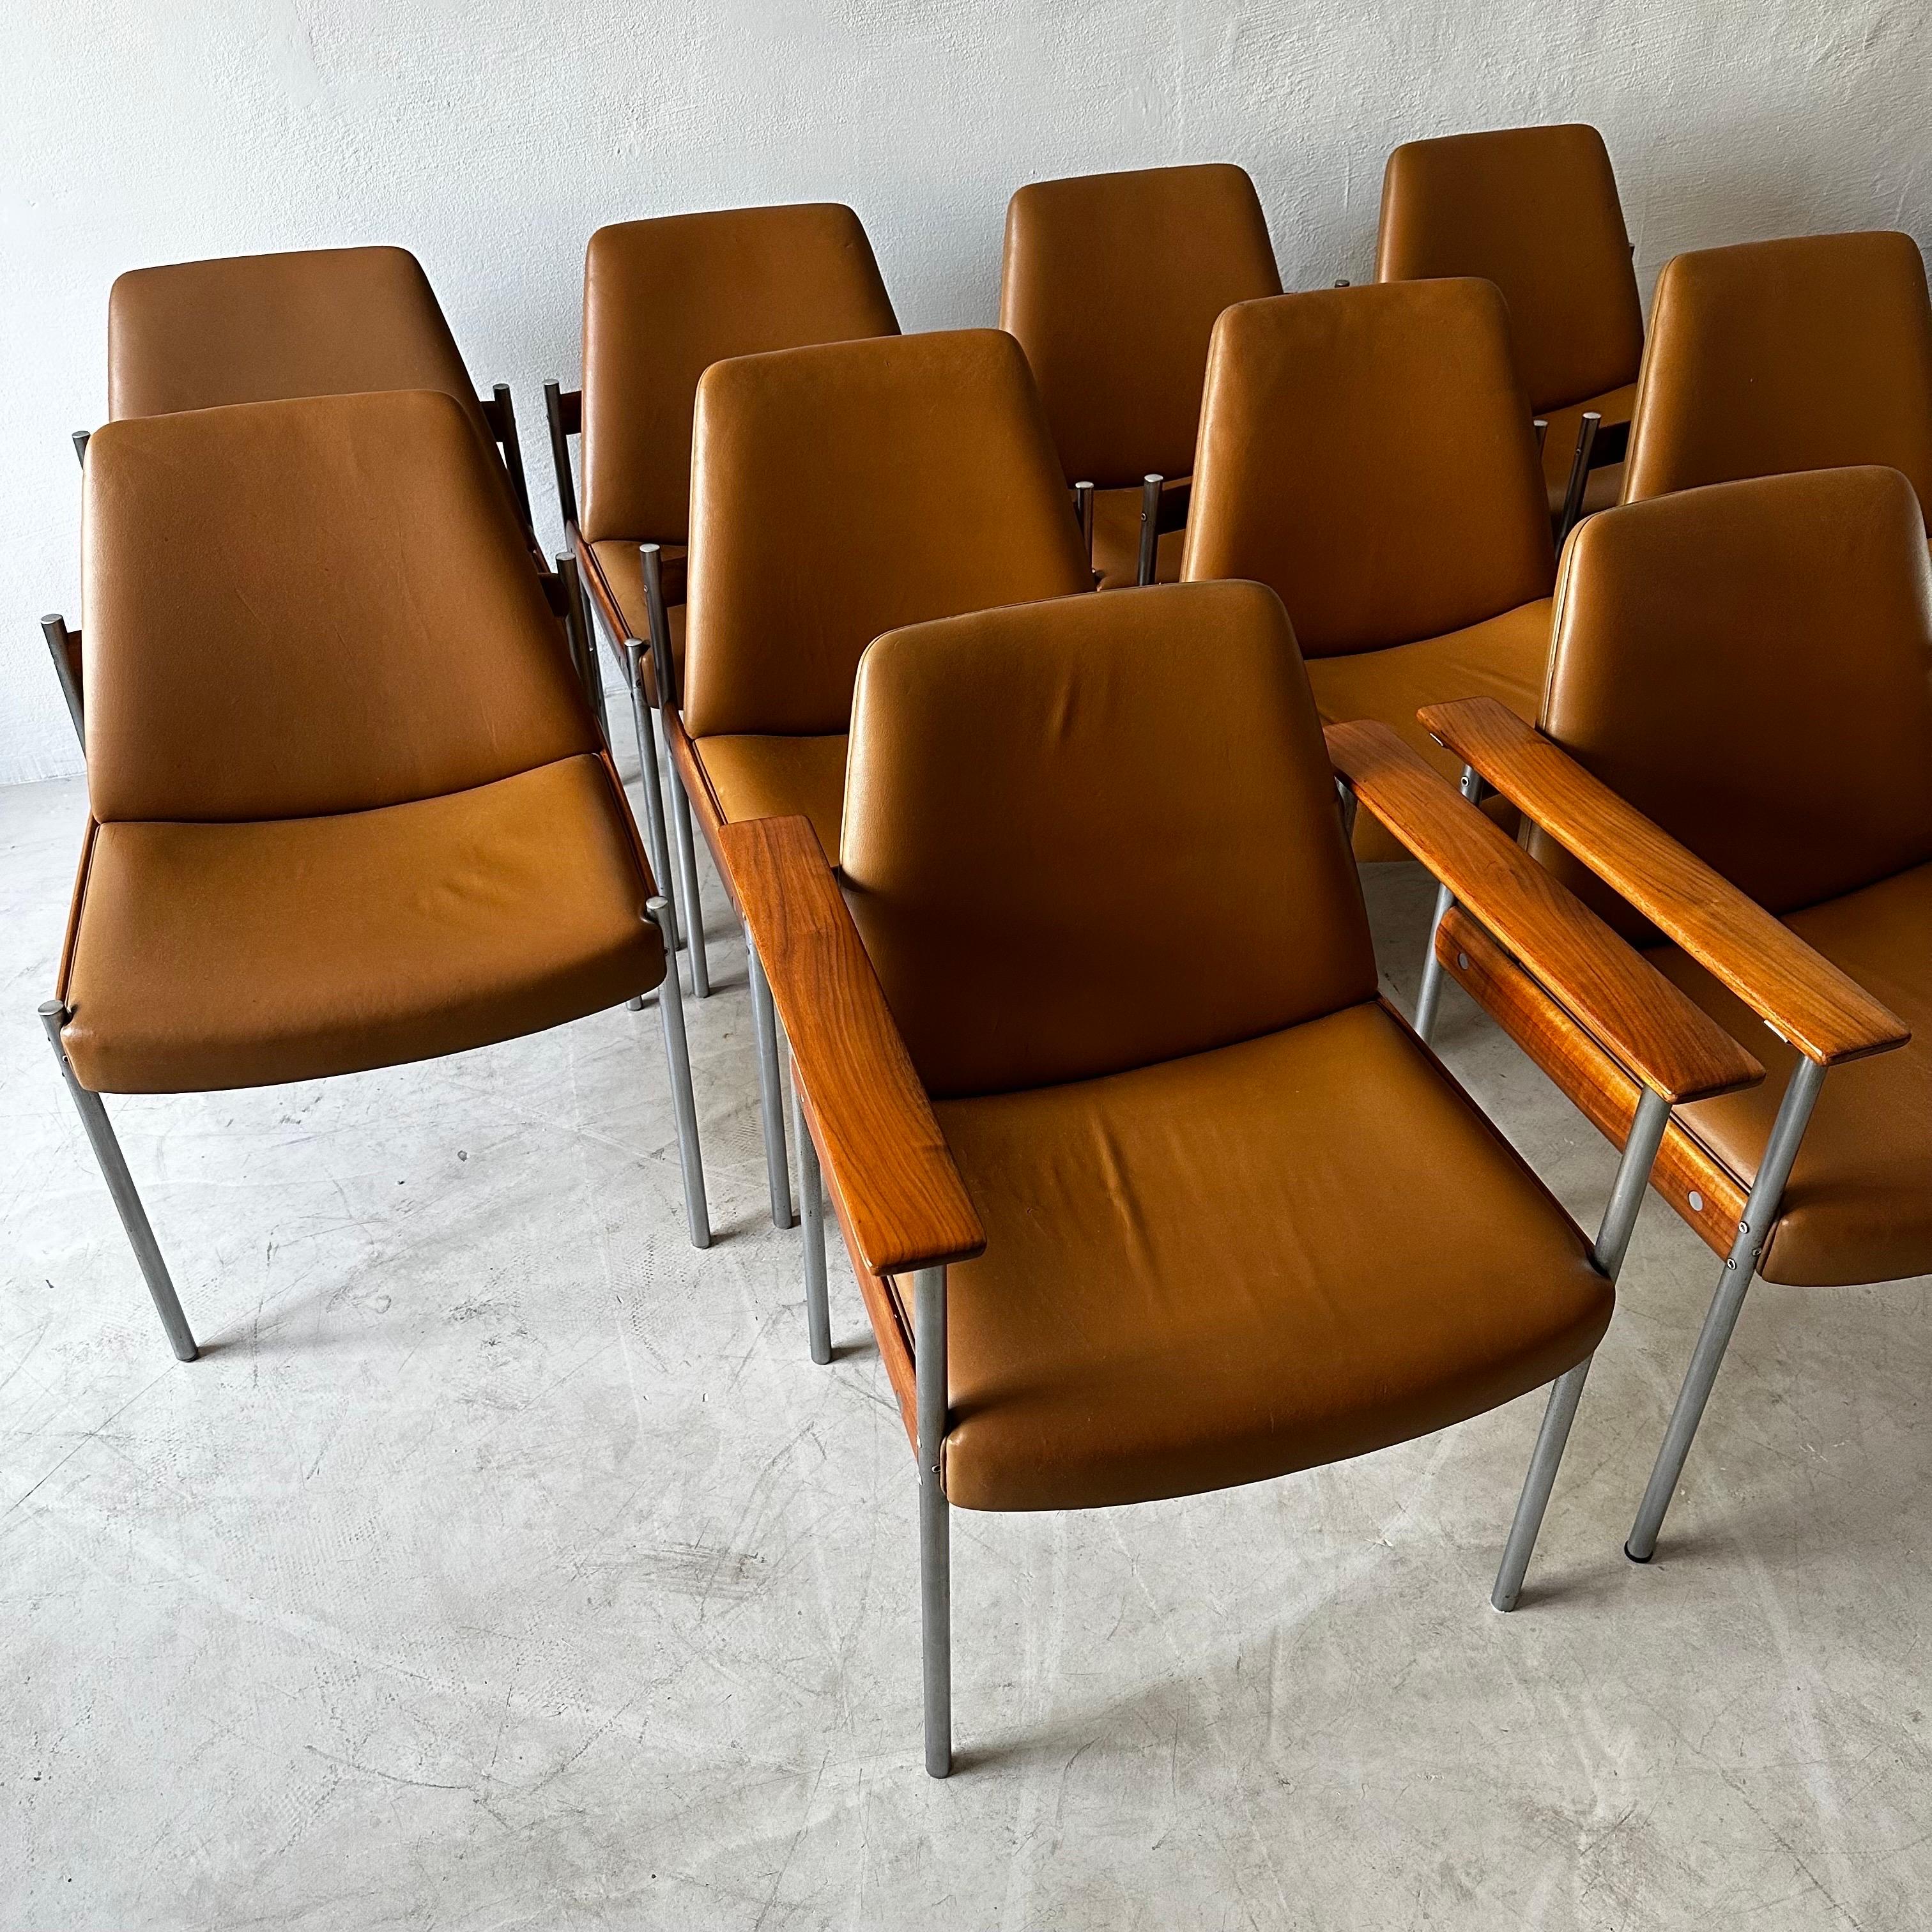 Norwegian Sven Ivar Dysthe Large Set of 10 Chairs in Cognac Leather and Walnut For Sale